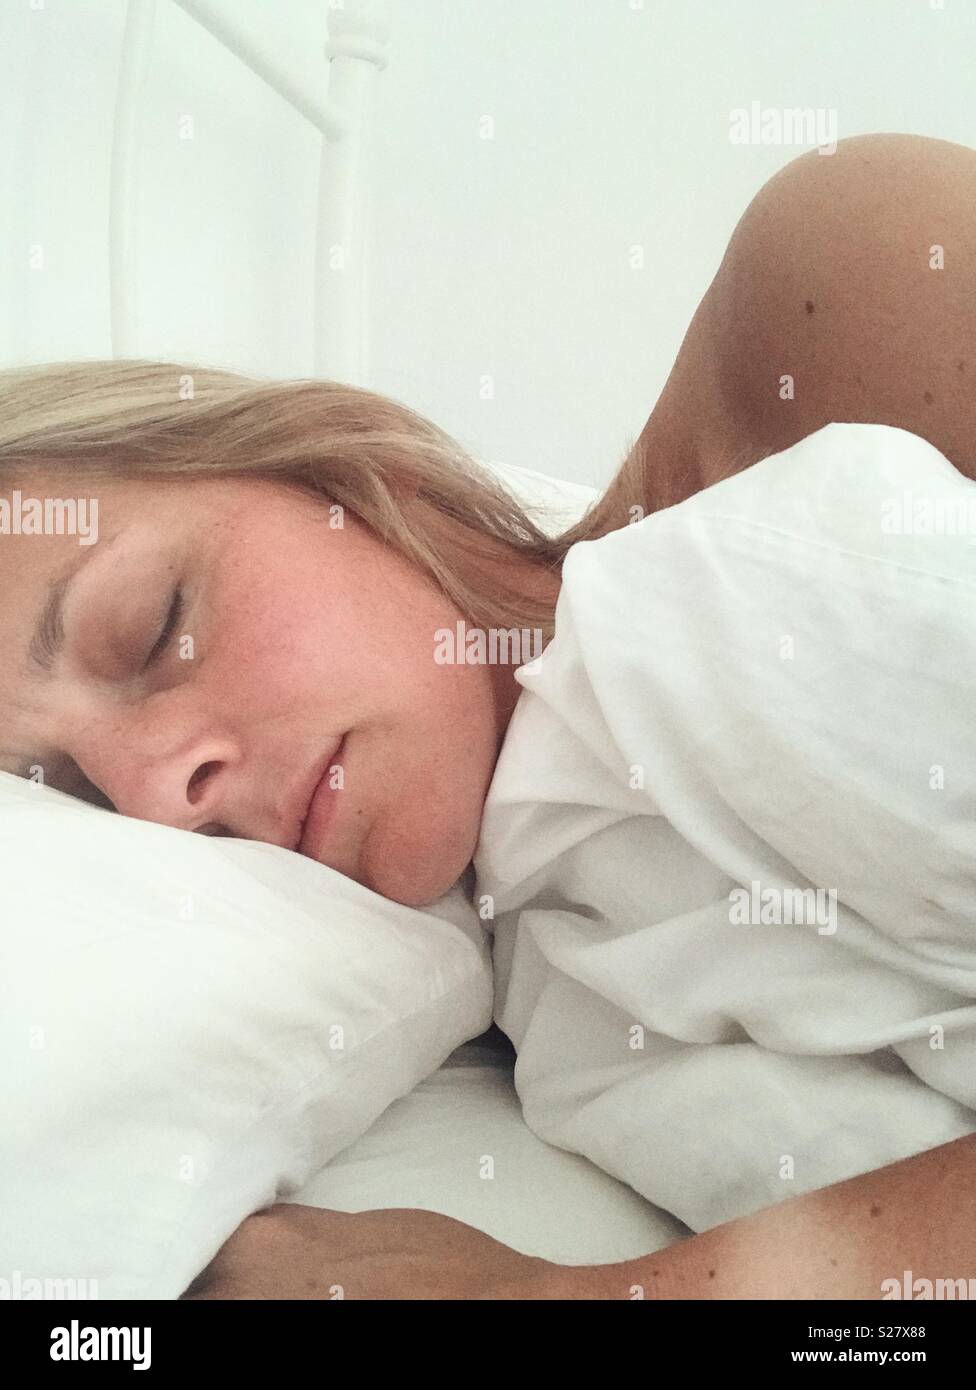 Sleeping lady in white bed sheets alone Stock Photo